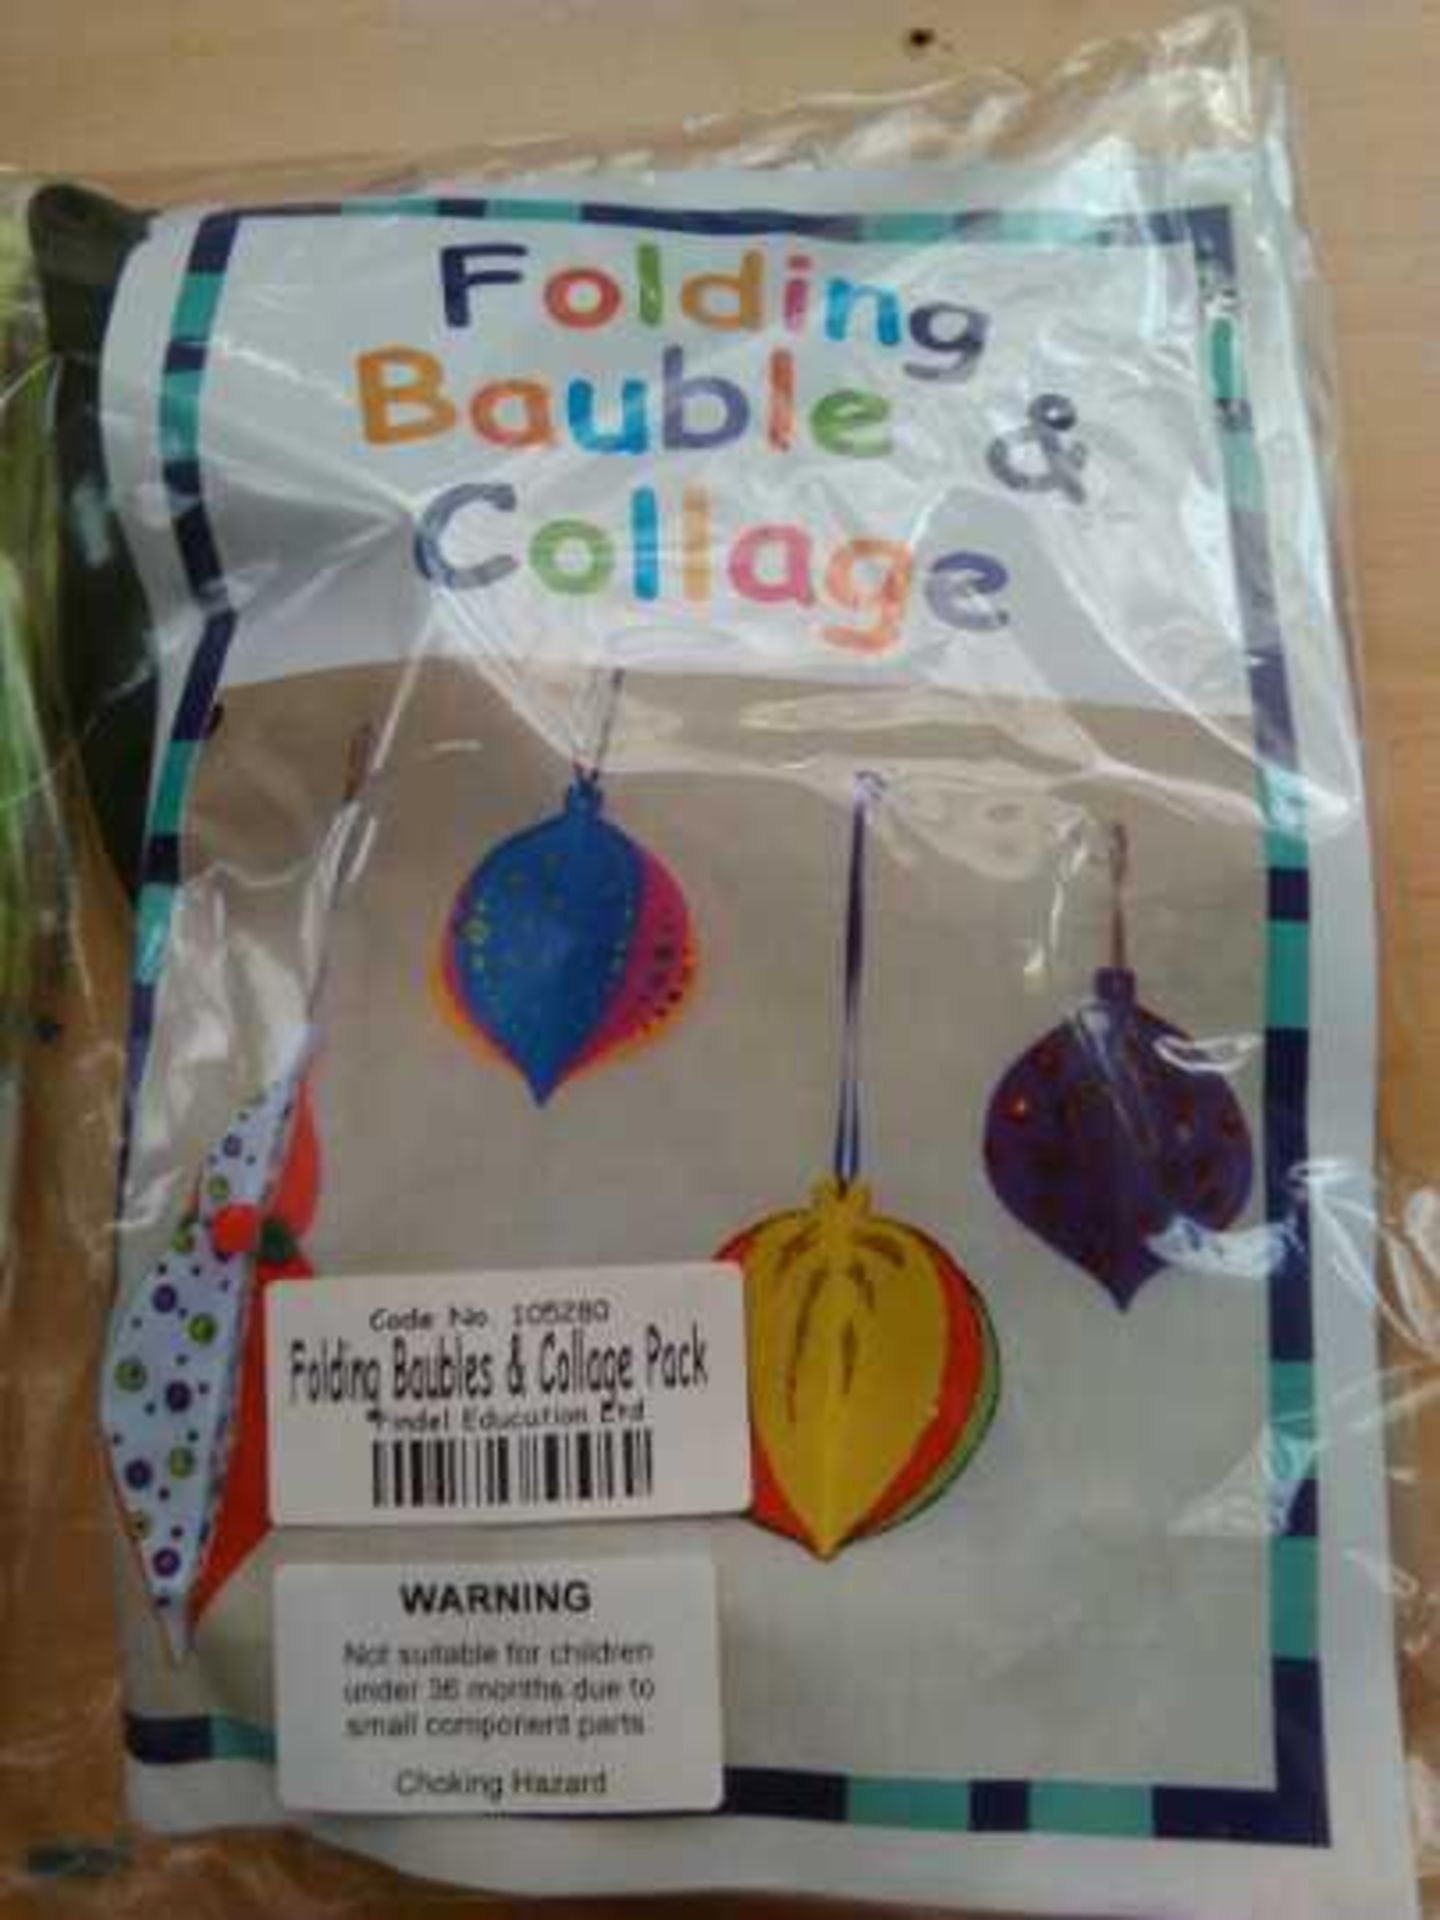 10x Folding bauble collage packs, new in packaging. Total RRP £128.80     SKU code-105280